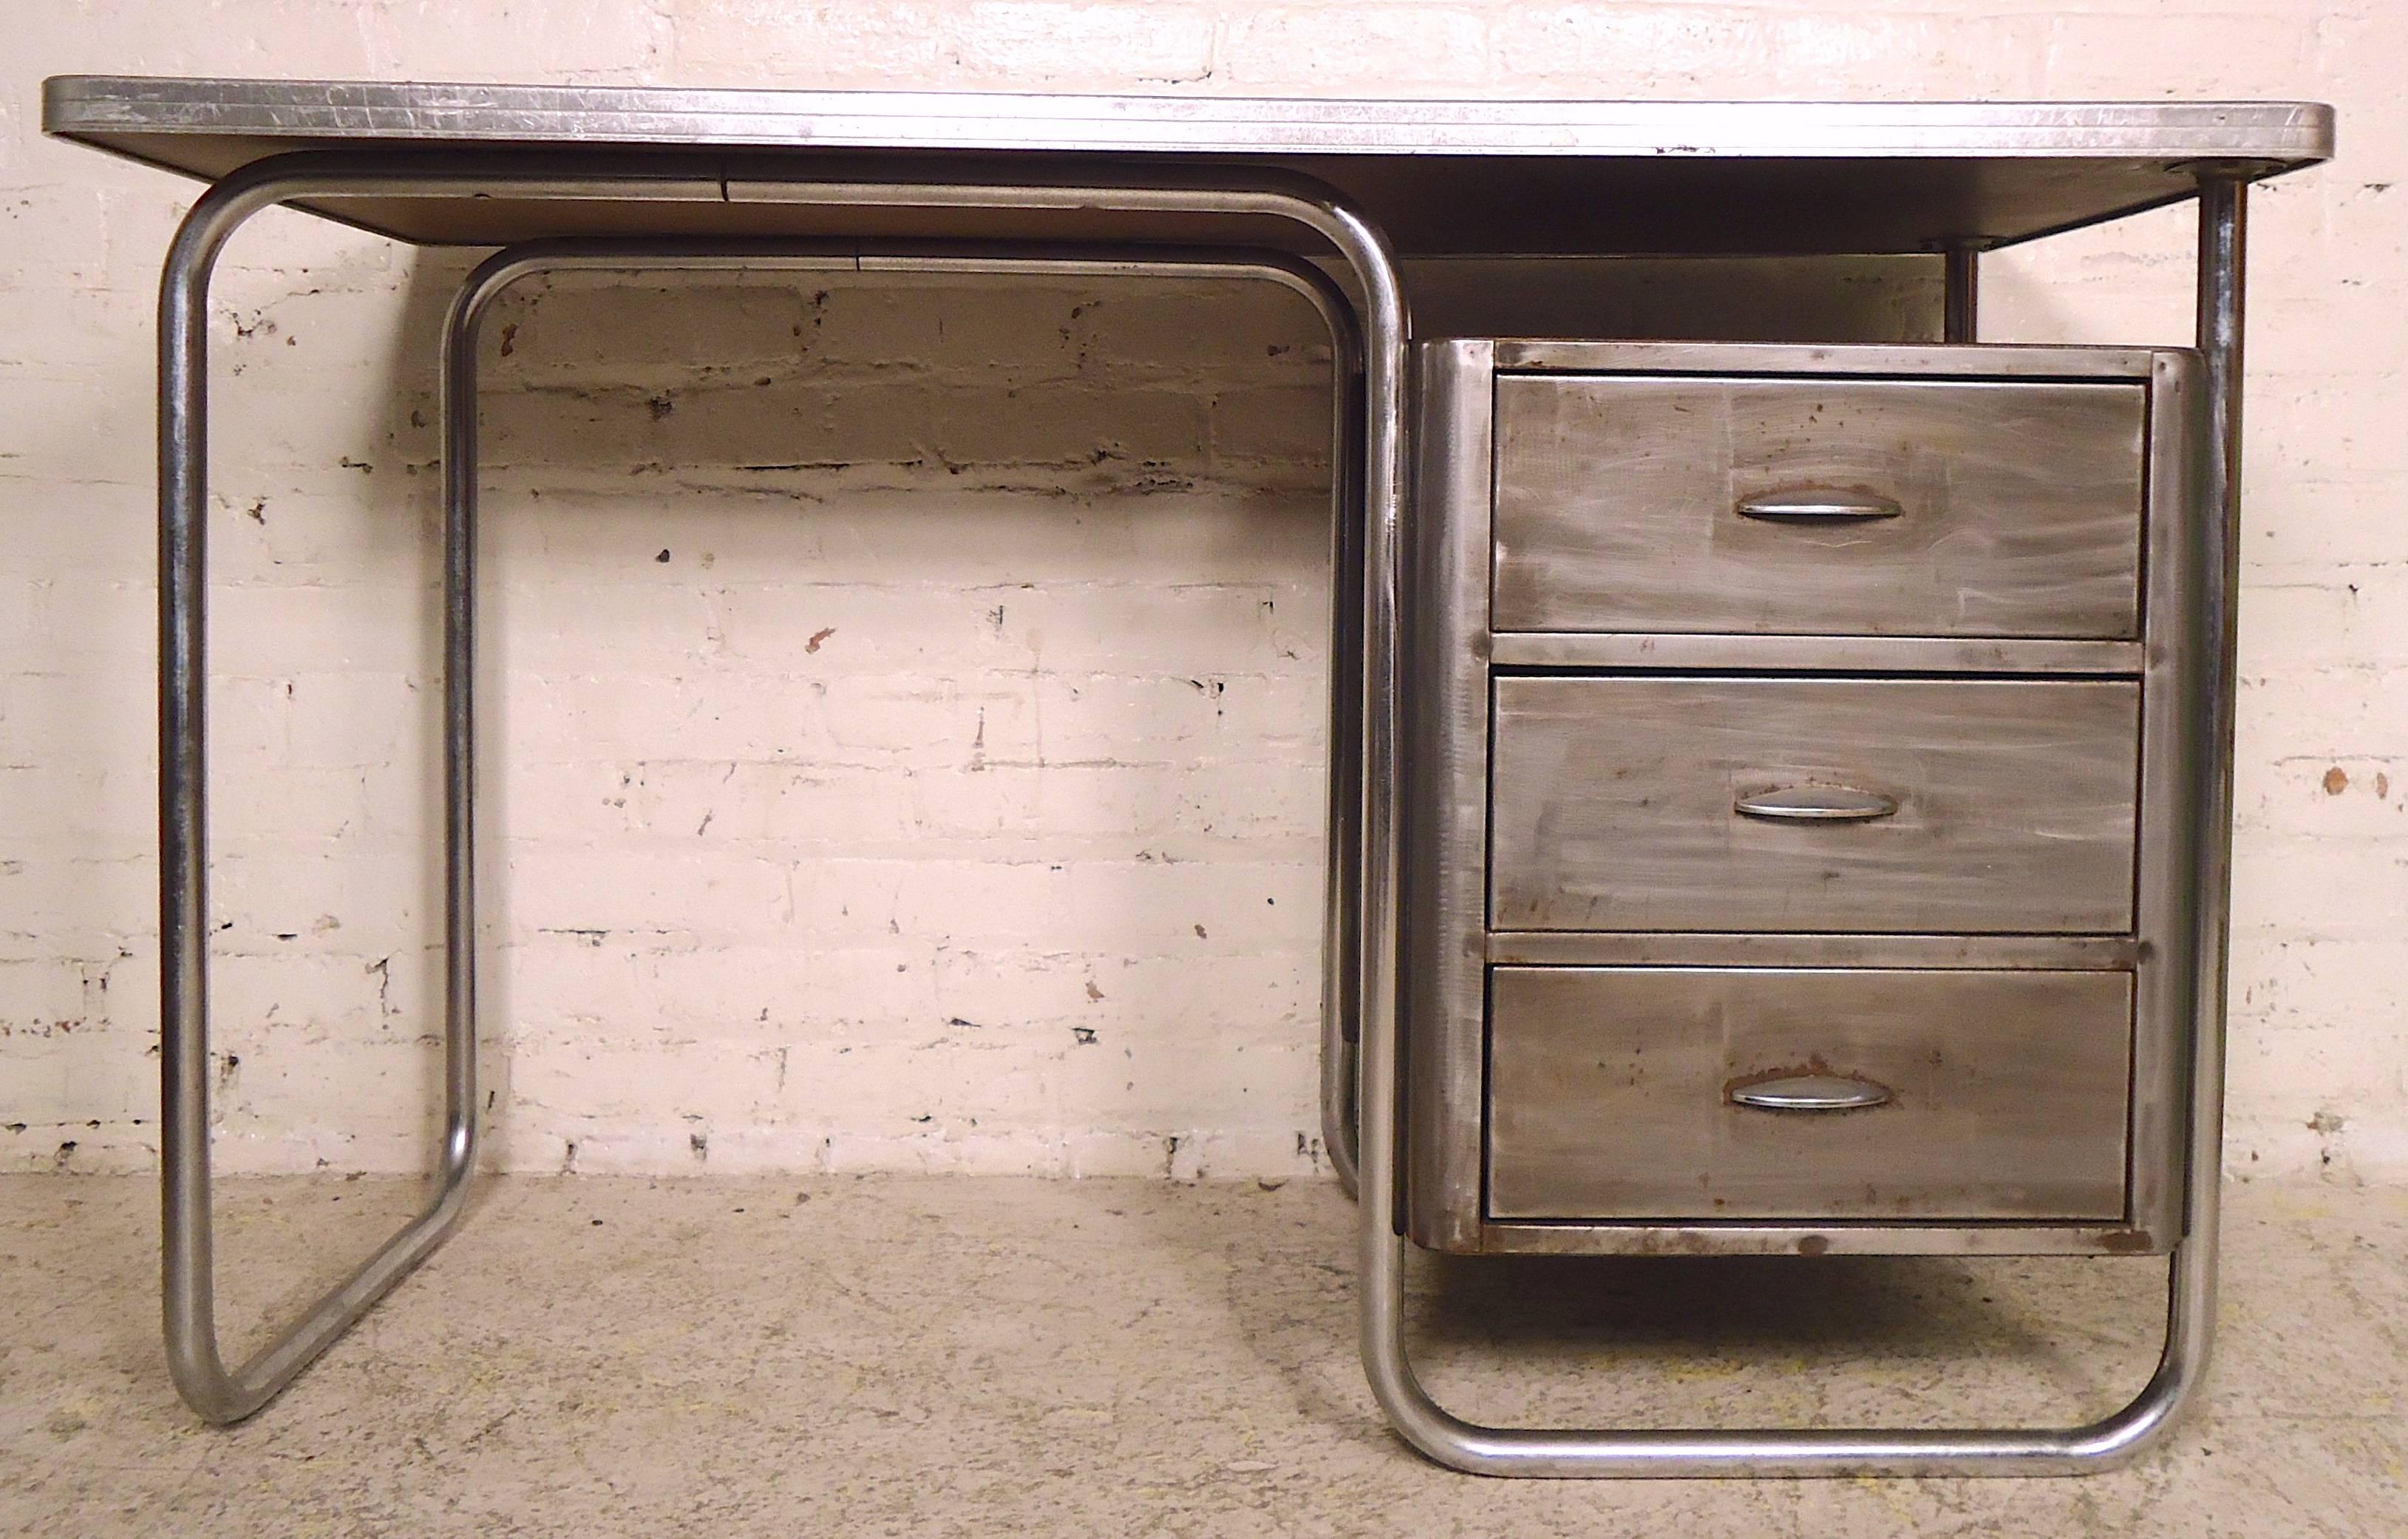 Great Art Deco design from a premier metal furniture maker. This desk features attractive curves and aluminum frame. Refinished in a rough Industrial style. Very strong and sturdy.
Measures: Kneehole: 26